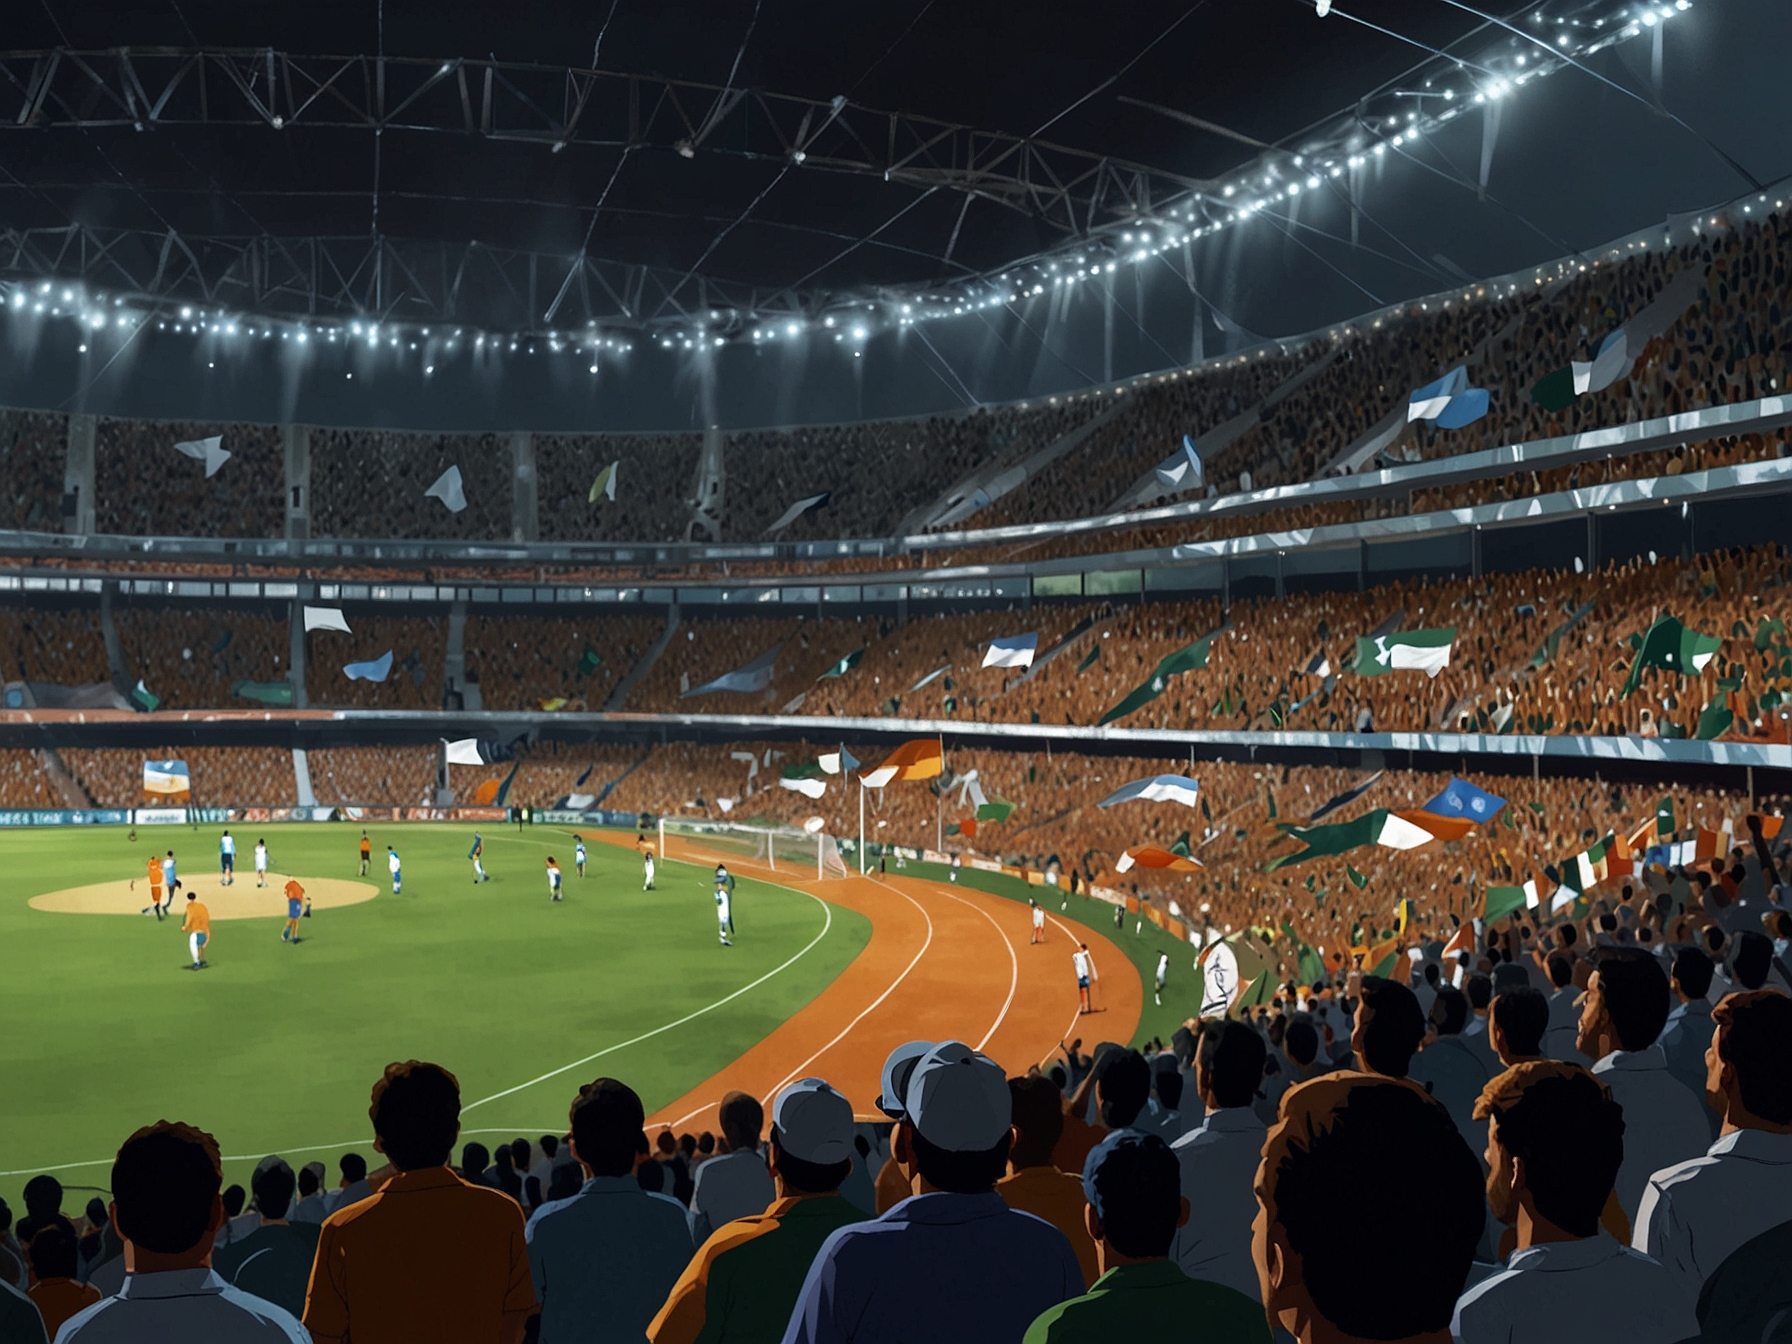 A panoramic view of a packed stadium with fans holding flags, creating an electric atmosphere. The excited crowd epitomizes the high stakes and global enthusiasm for the India-Australia Super-8 matchup.